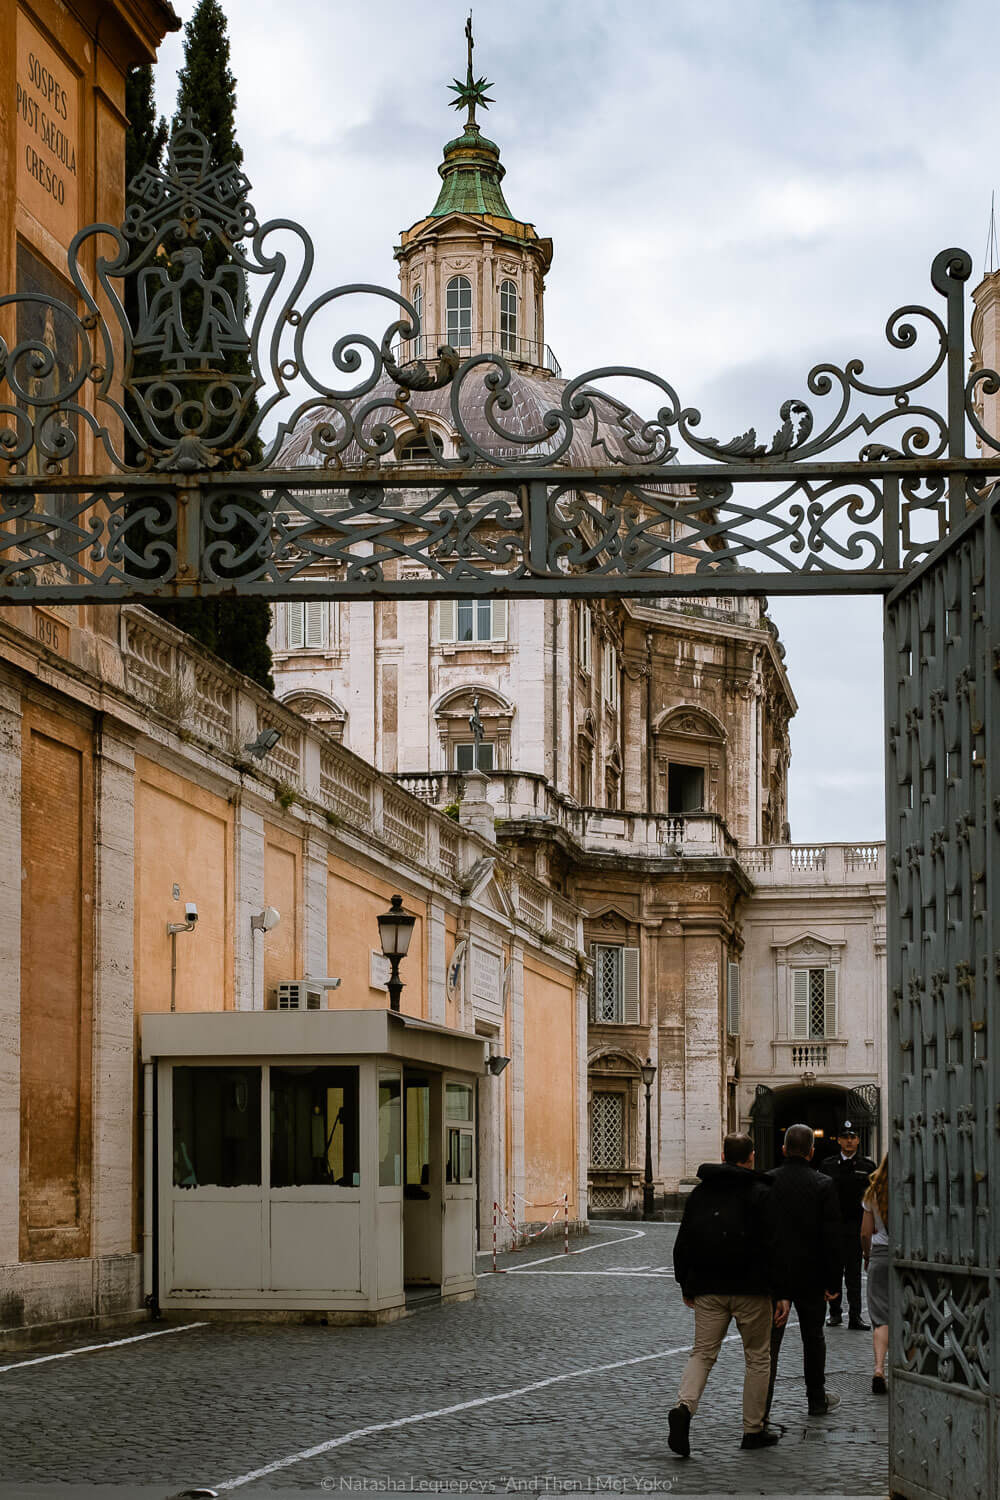 Entering the Vatican for the Scavi Tour. Travel photography and guide by © Natasha Lequepeys for "And Then I Met Yoko". #rome #italy #travelblog #travelphotography